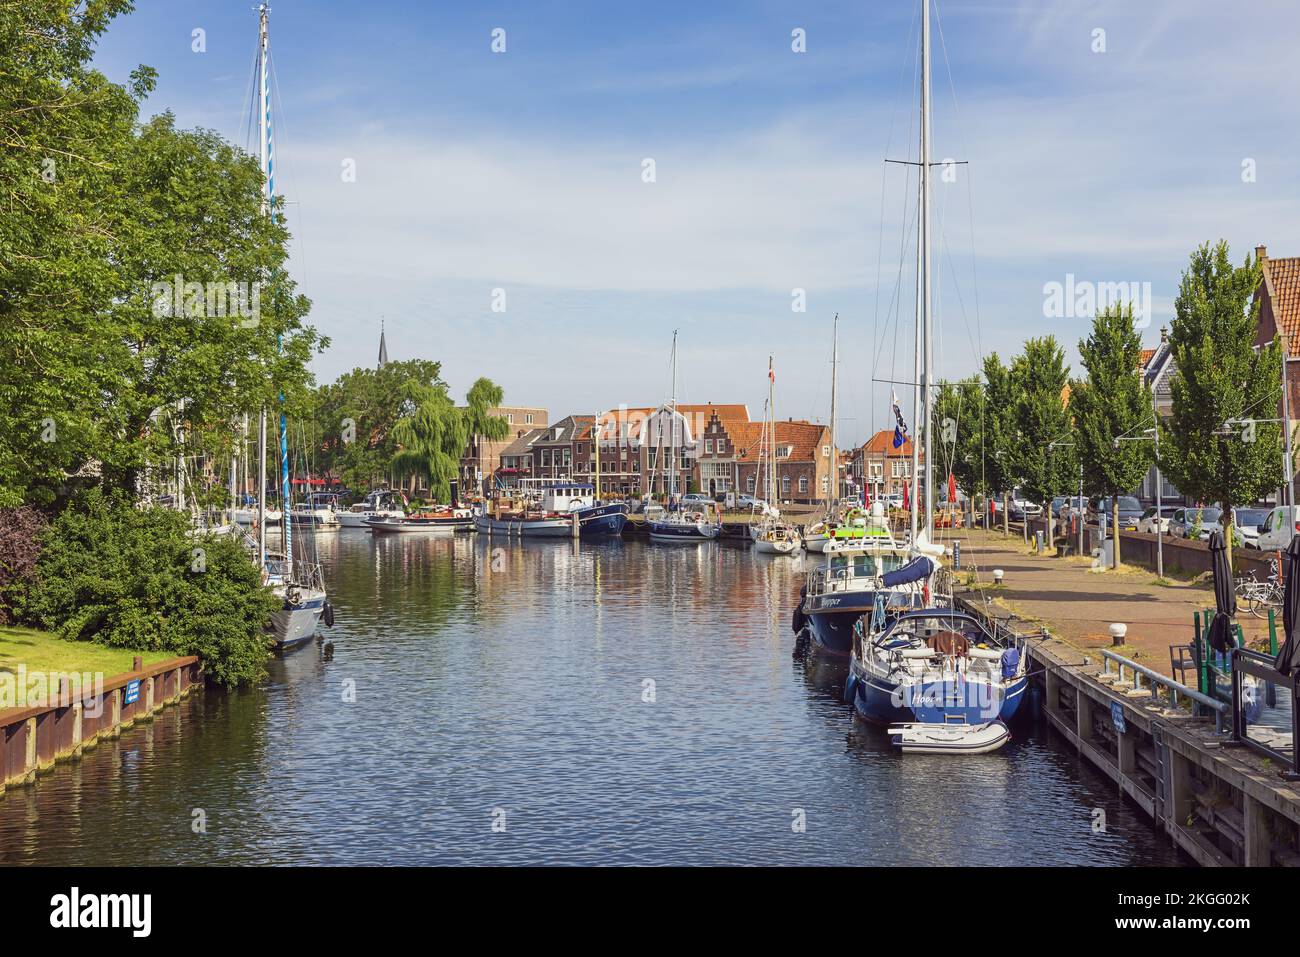 Editorial: ENKHUIZEN, NORTH HOLLAND, NETHERLANDS, JULY 12, 2022 - The old port of Enkhuizen seen from the bascule bridge near the Drommedaris gate Stock Photo